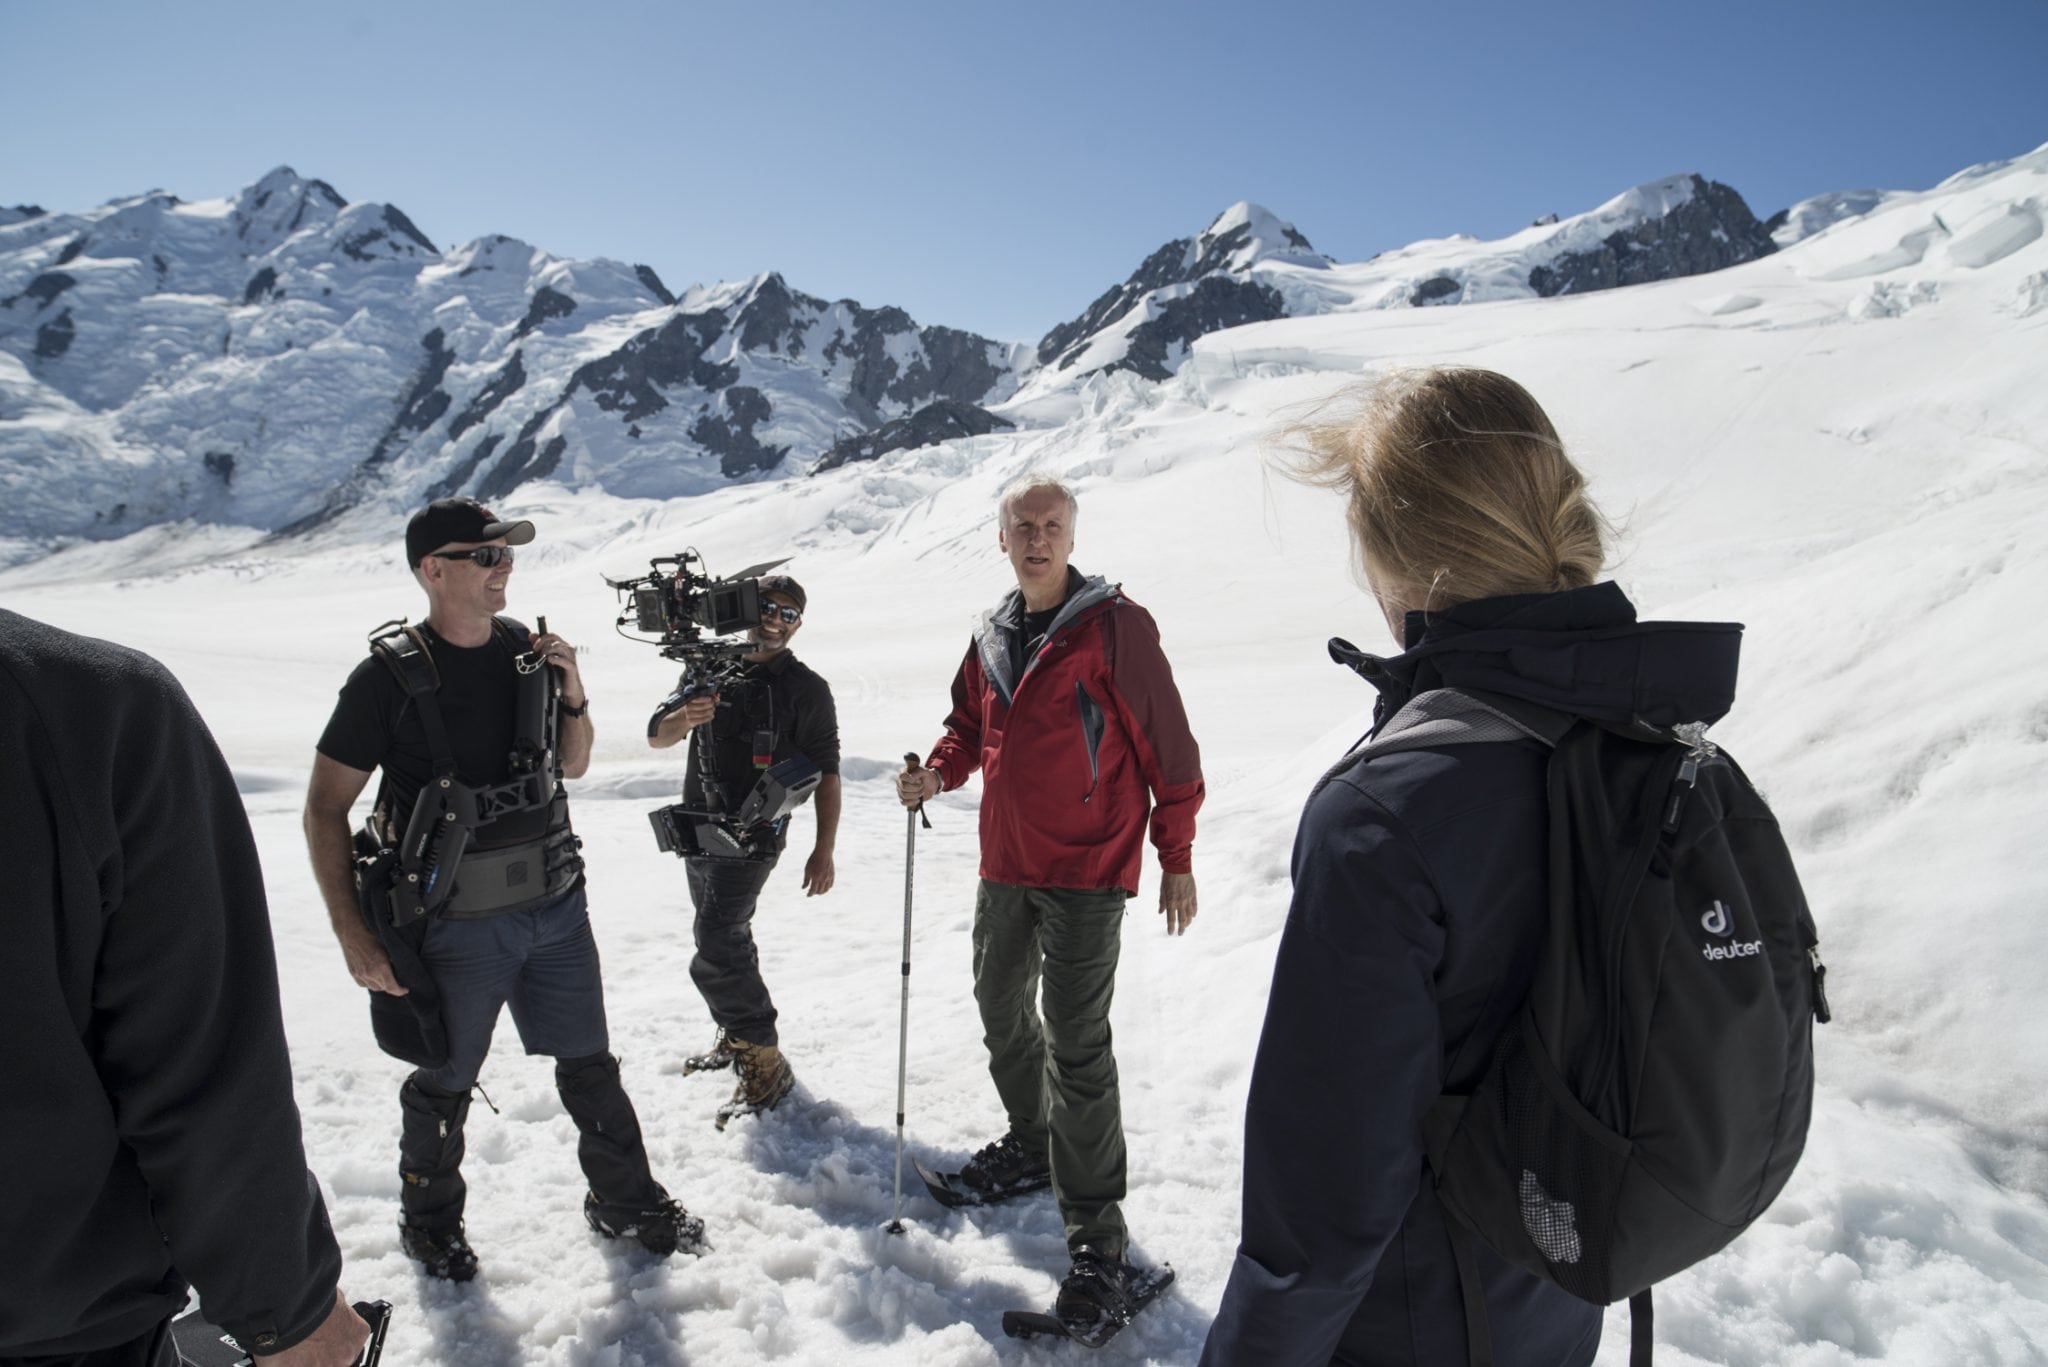 James Cameron endorsing New Zealand tourism is the latest in a recent spate of A-list collaborations.